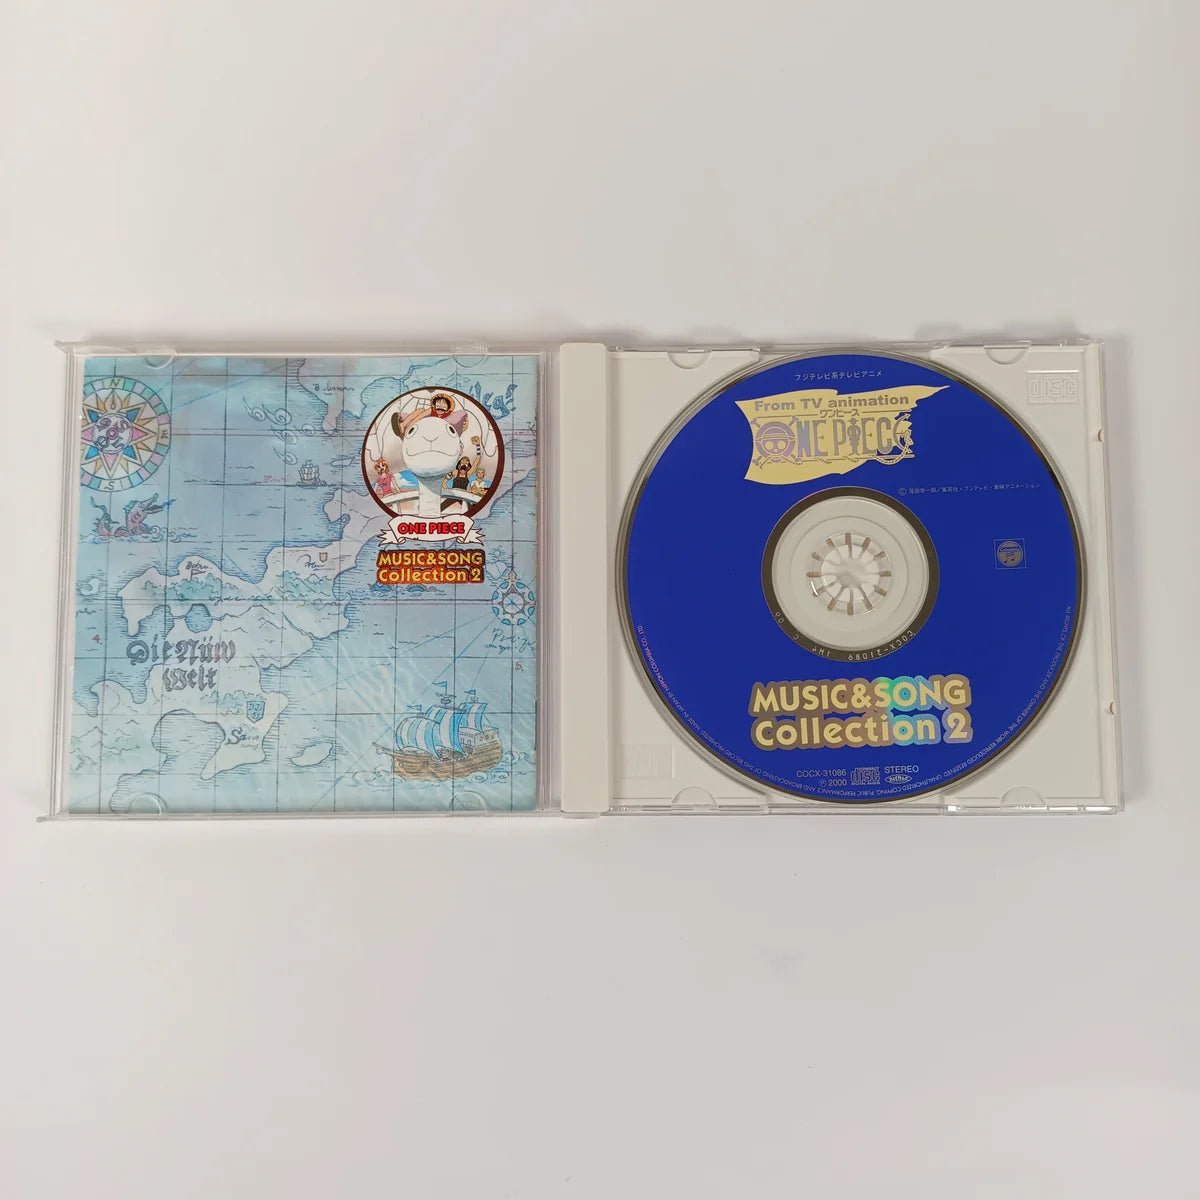 One Piece Music & Song Collection 2